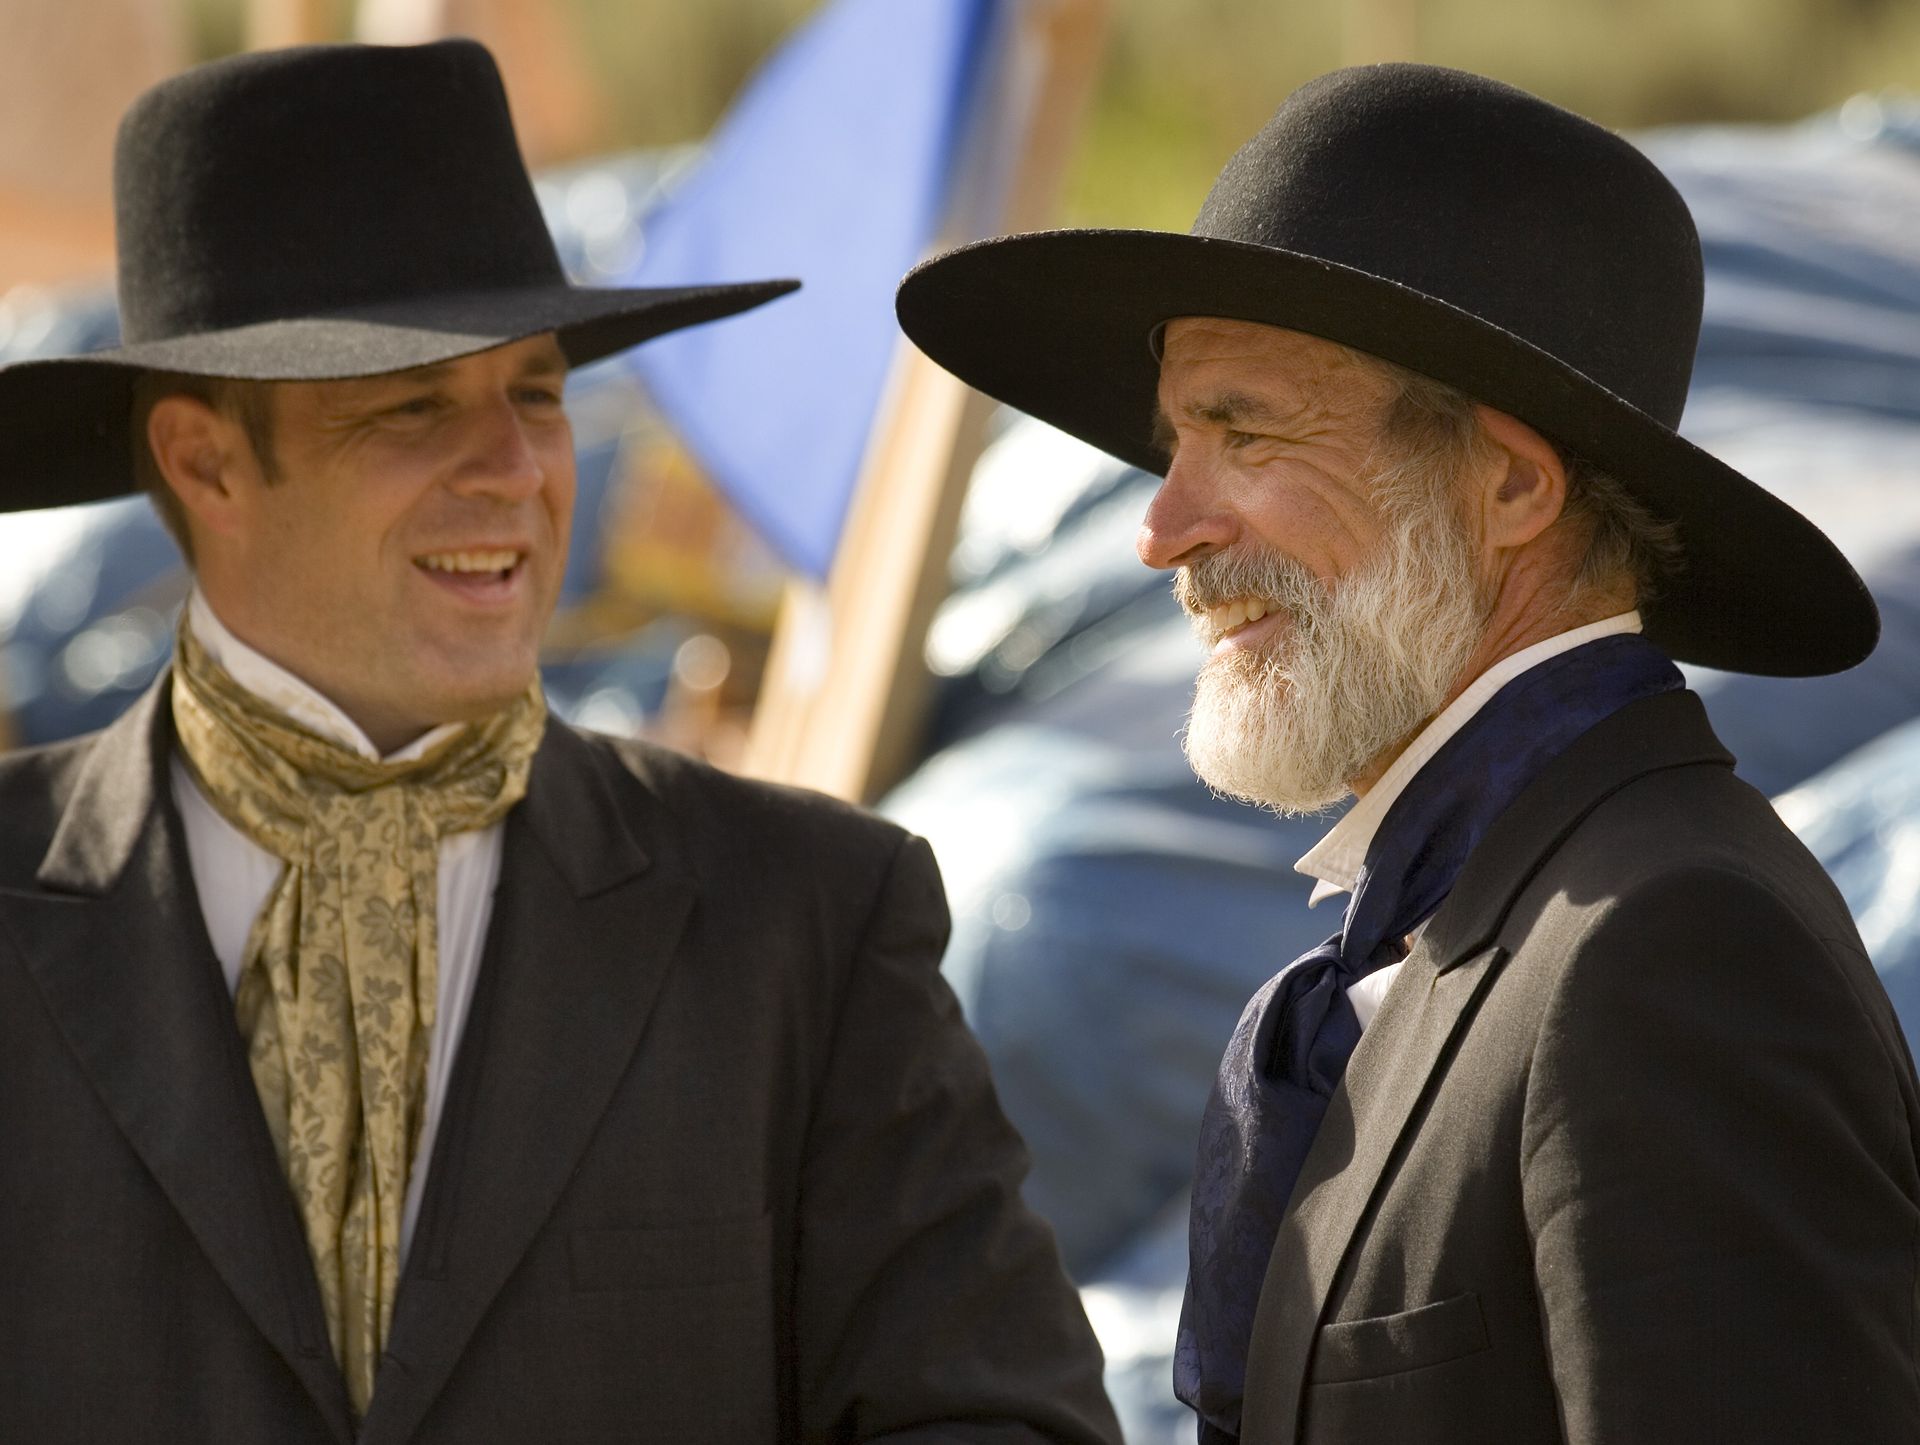 Two men dressed in suits and wide-brimmed hats stand and talk together.